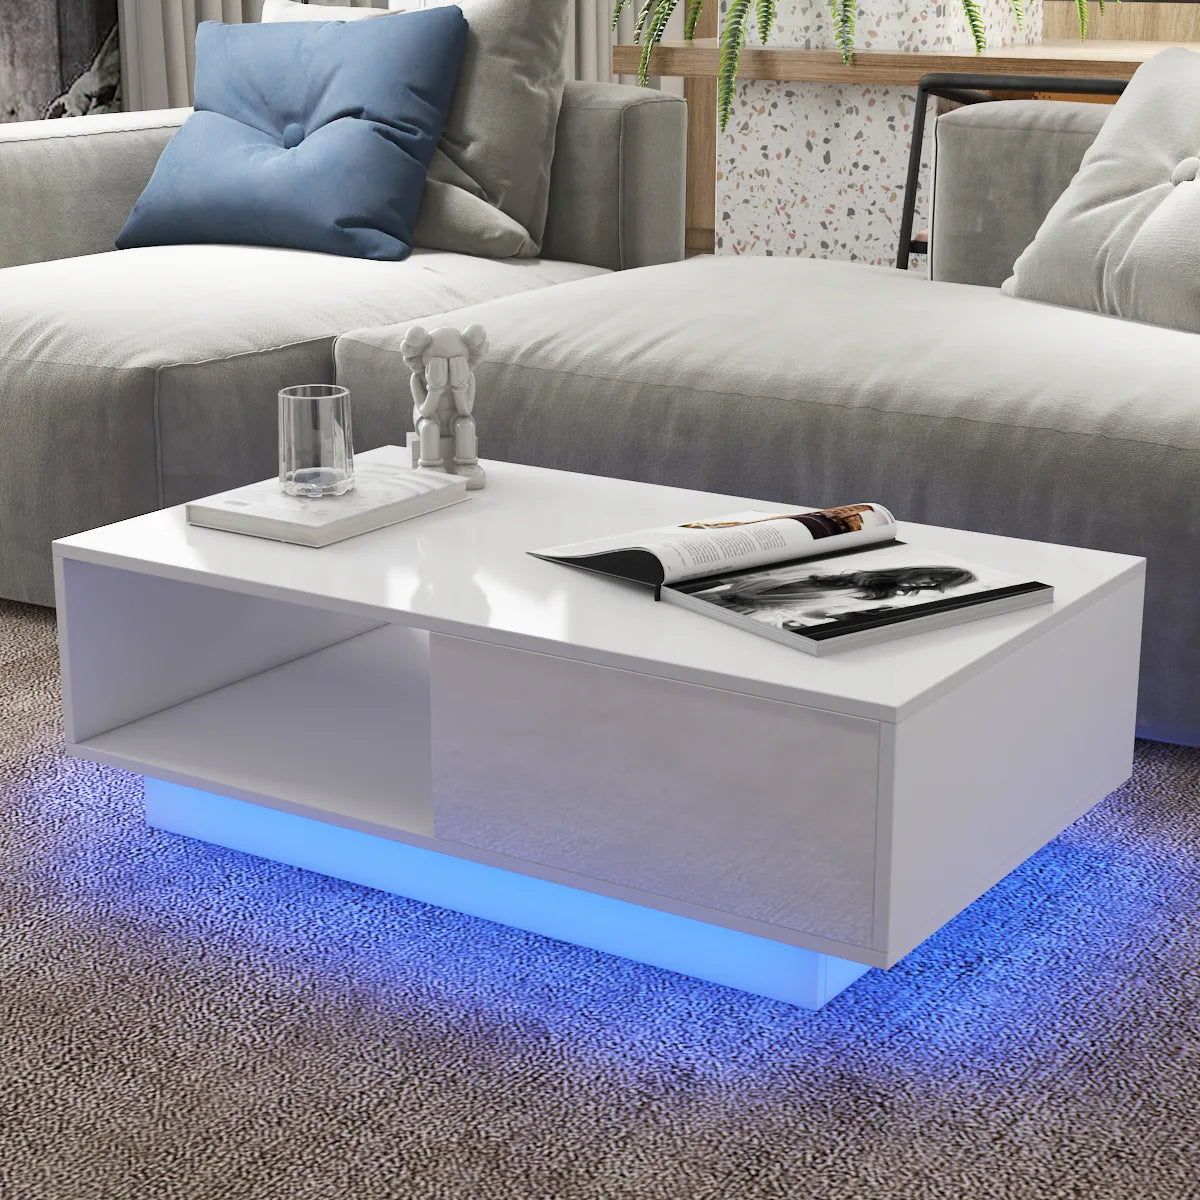 High Gloss Coffee Tables RGB LED End Table Nordic Modern Side Table Living Room Drawers Cabinet Storage Organizer Furniture - Farefe